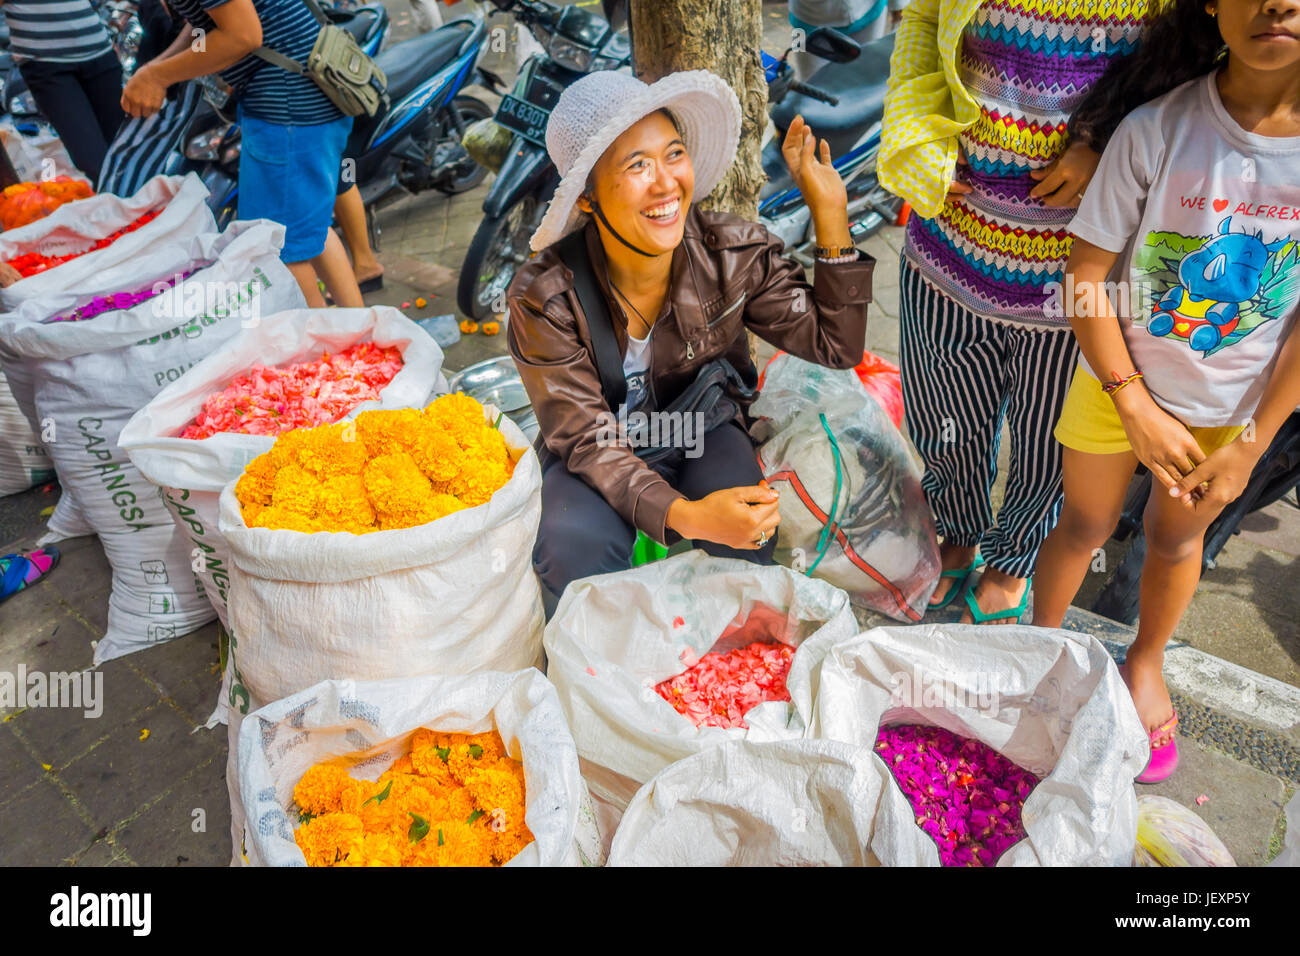 BALI, INDONESIA - MARCH 08, 2017: Unidentified people in outdoors Bali flower market. Flowers are used daily by Balinese Hindus as symbolic offerings  Stock Photo